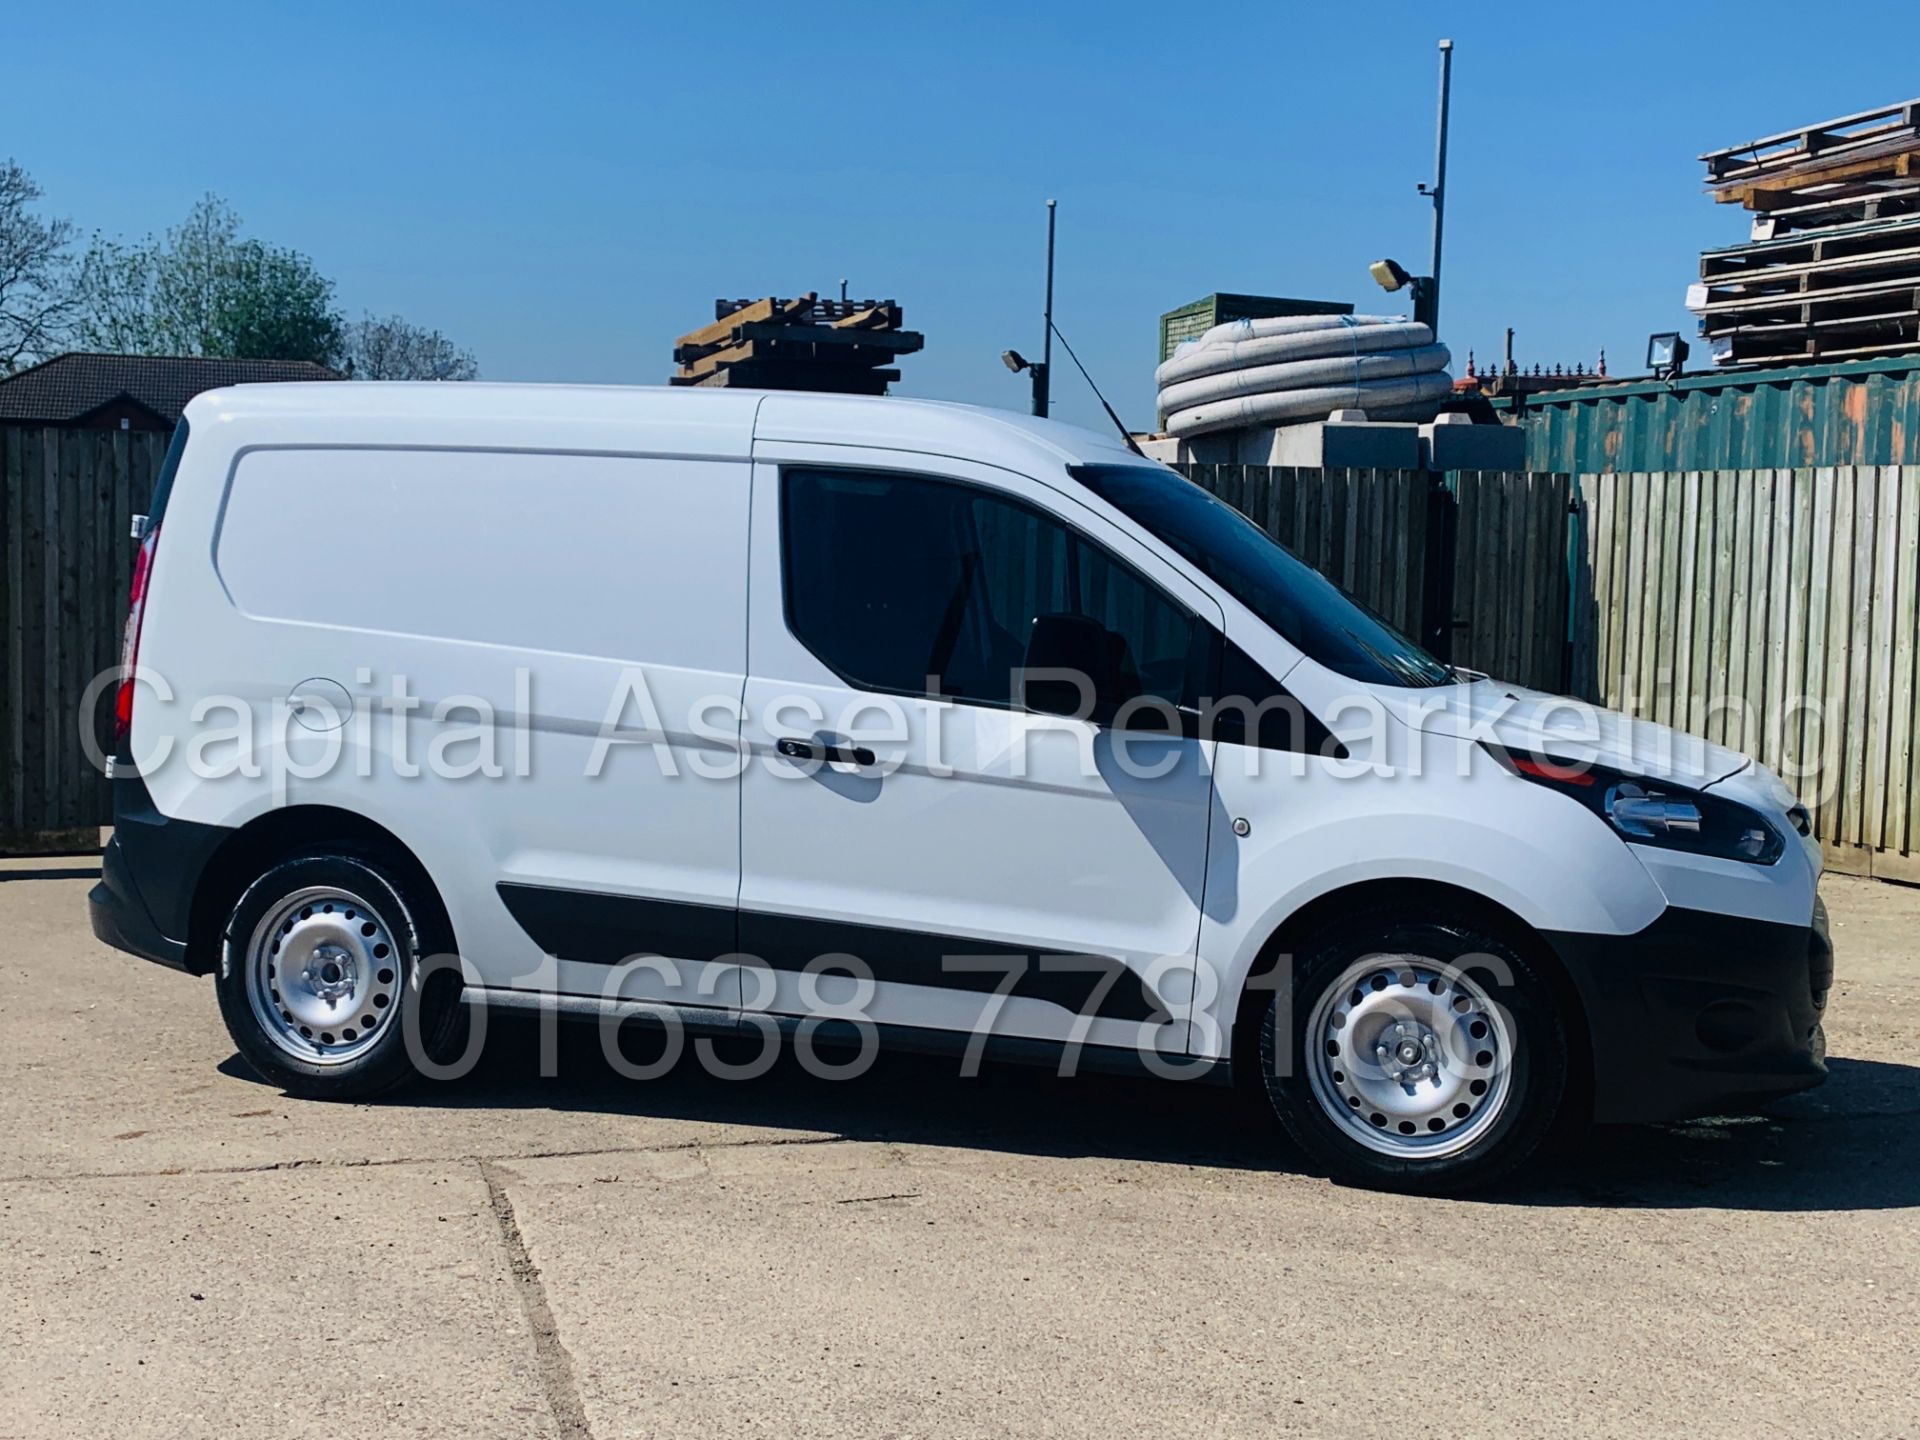 (On Sale) FORD TRANSIT CONNECT *SWB* (2017 - EURO 6) '1.5 TDCI - 6 SPEED' (1 OWNER - FULL HISTORY) - Image 10 of 38